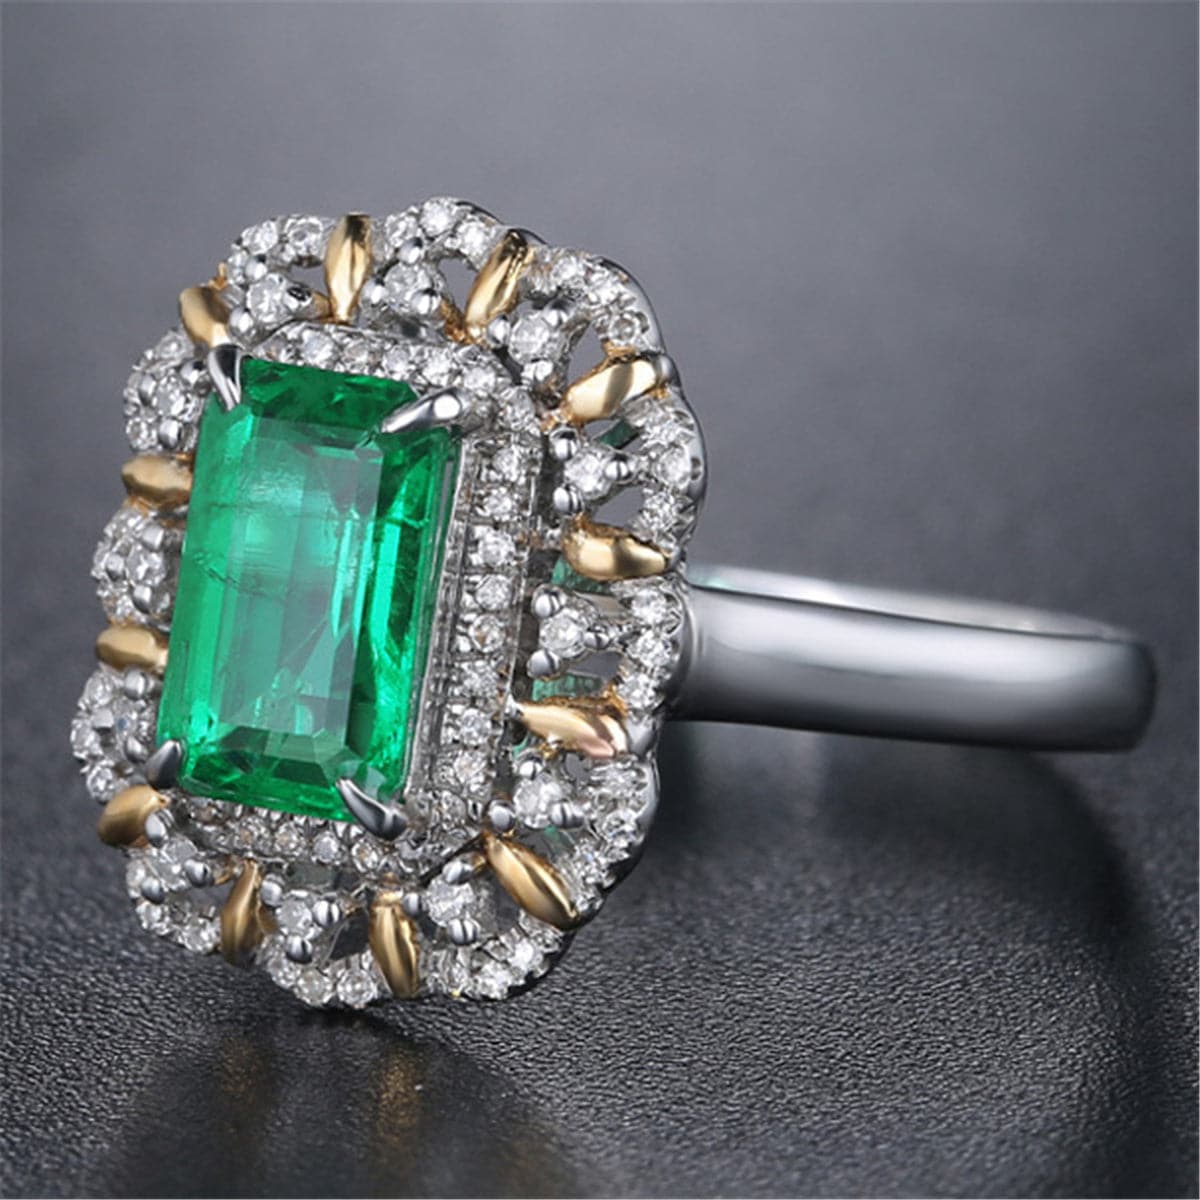 Green cubic zirconia & Crystal Floral Halo Ring - streetregion